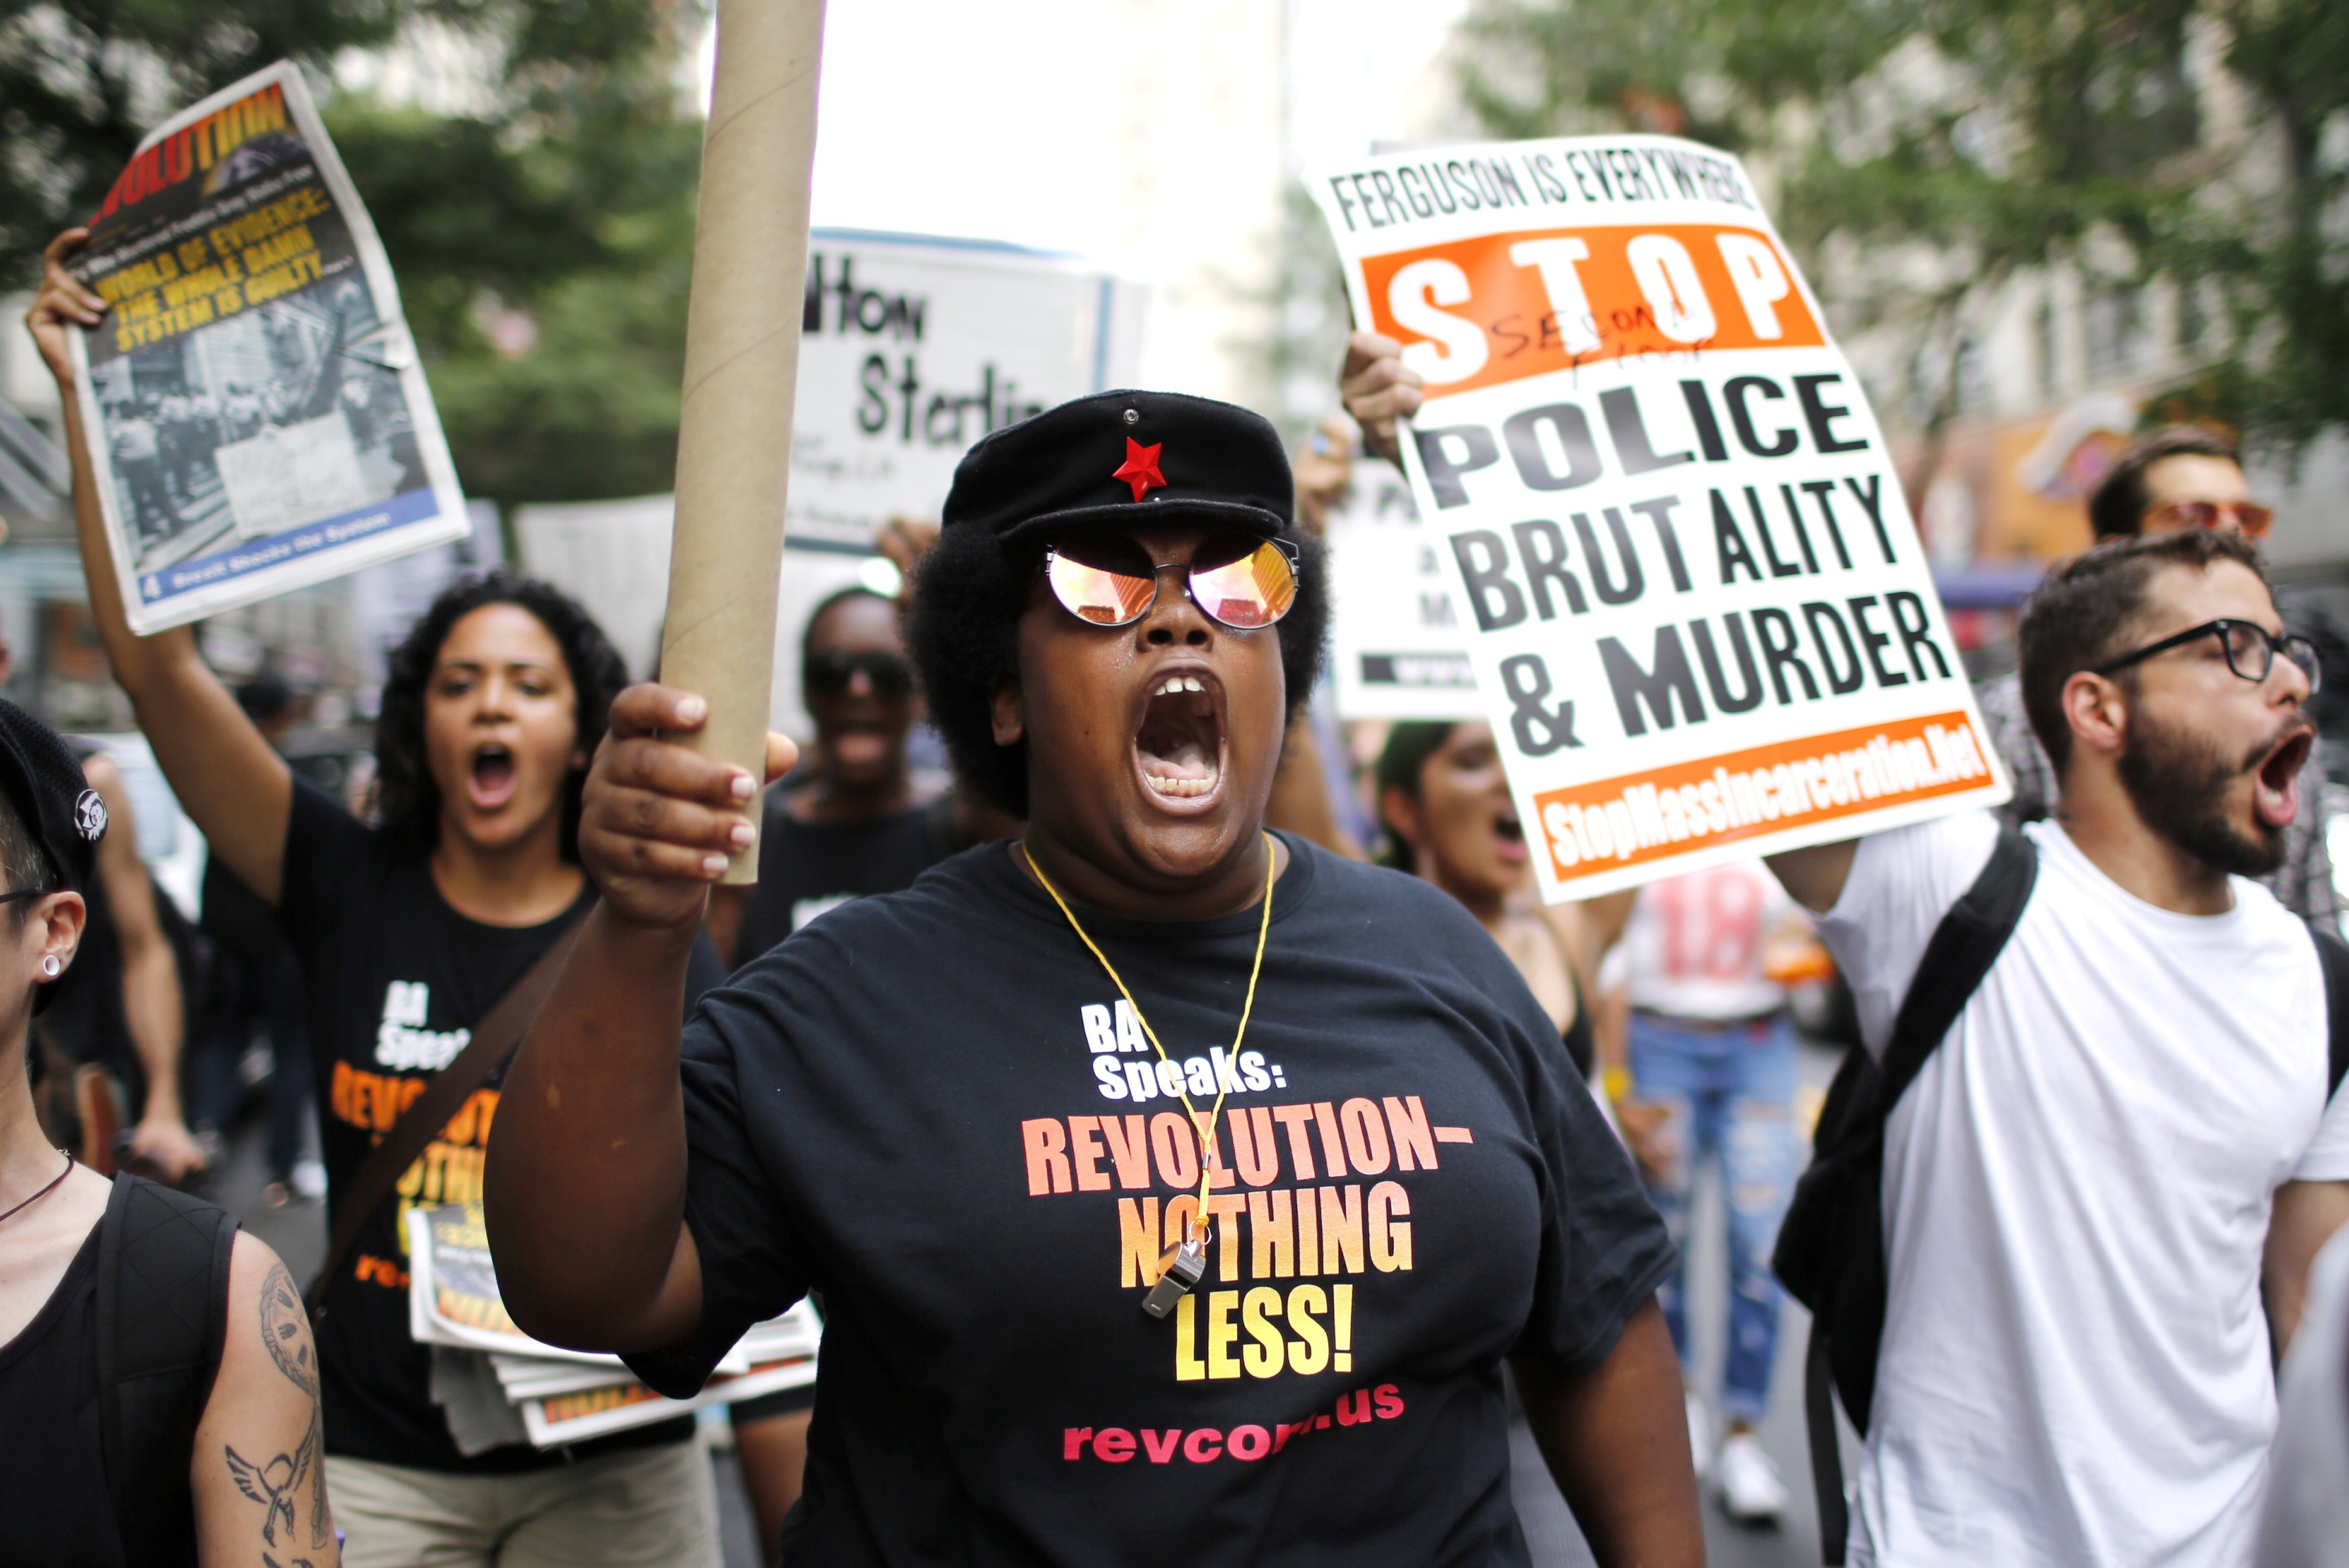 People take part in a protest for the killing of Alton Sterling and Philando Castile during a march along Manhattan's streets in New York, on July 7, 2016. (Eduardo Munoz—Reuters)